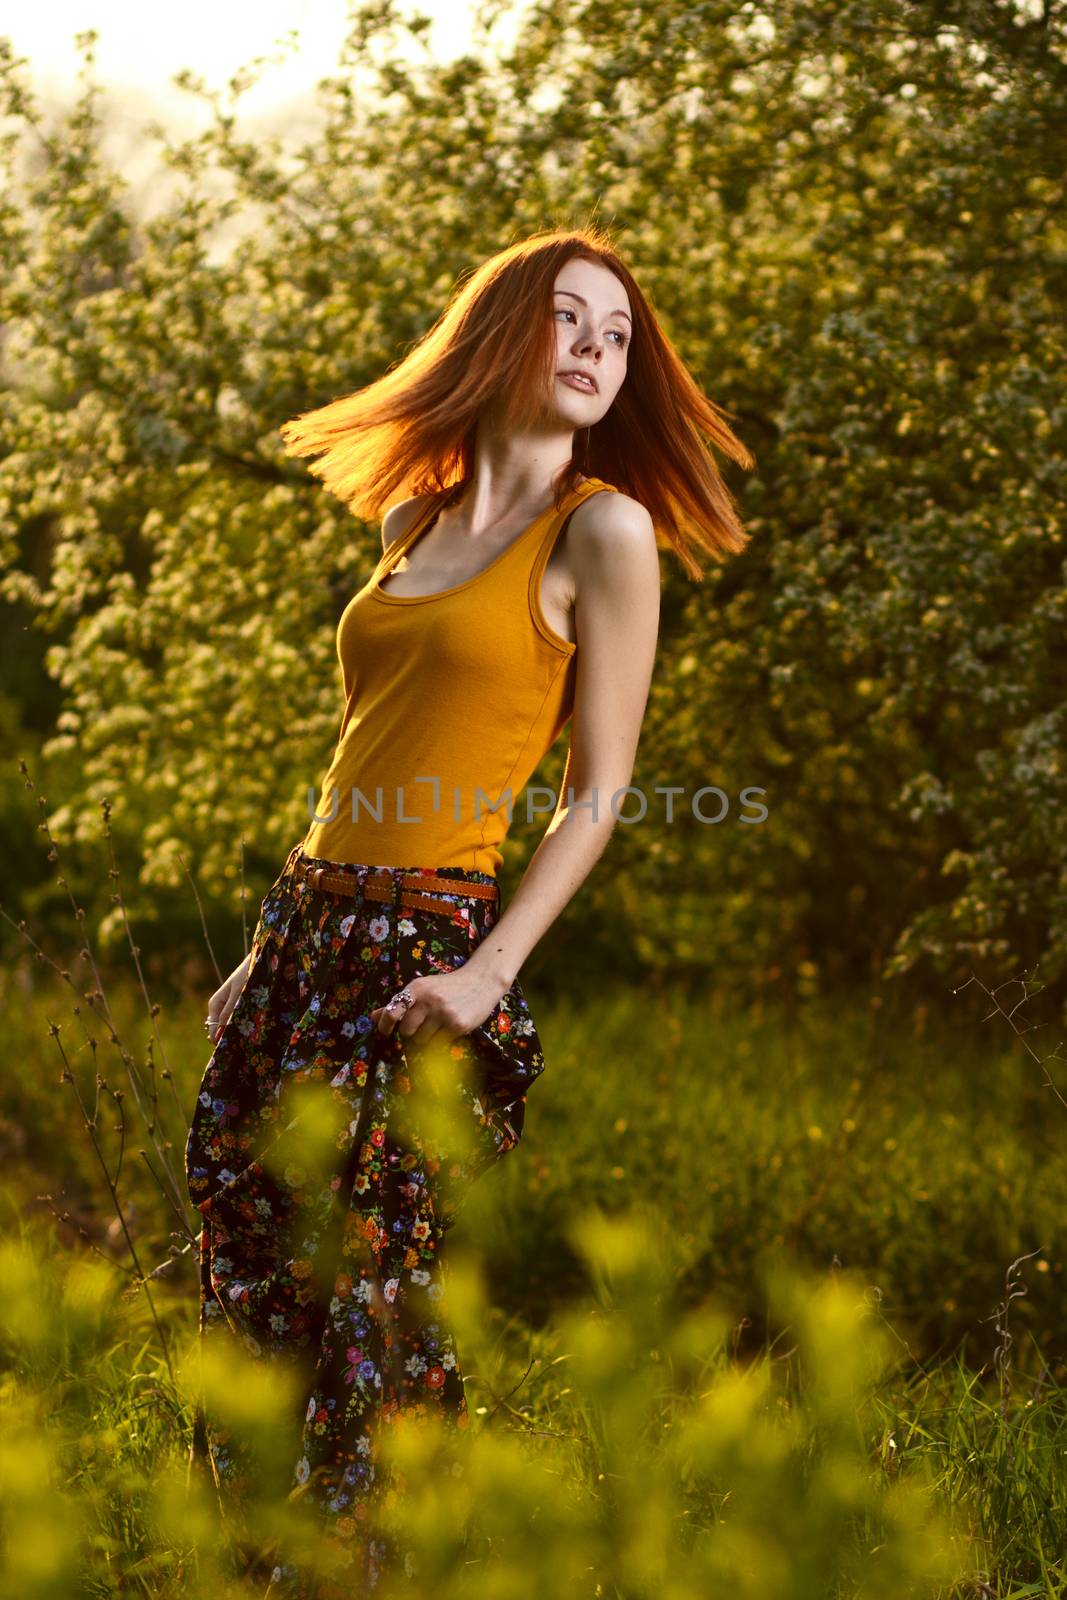 Redhead girl walking under sunset rays in forest by mrakor